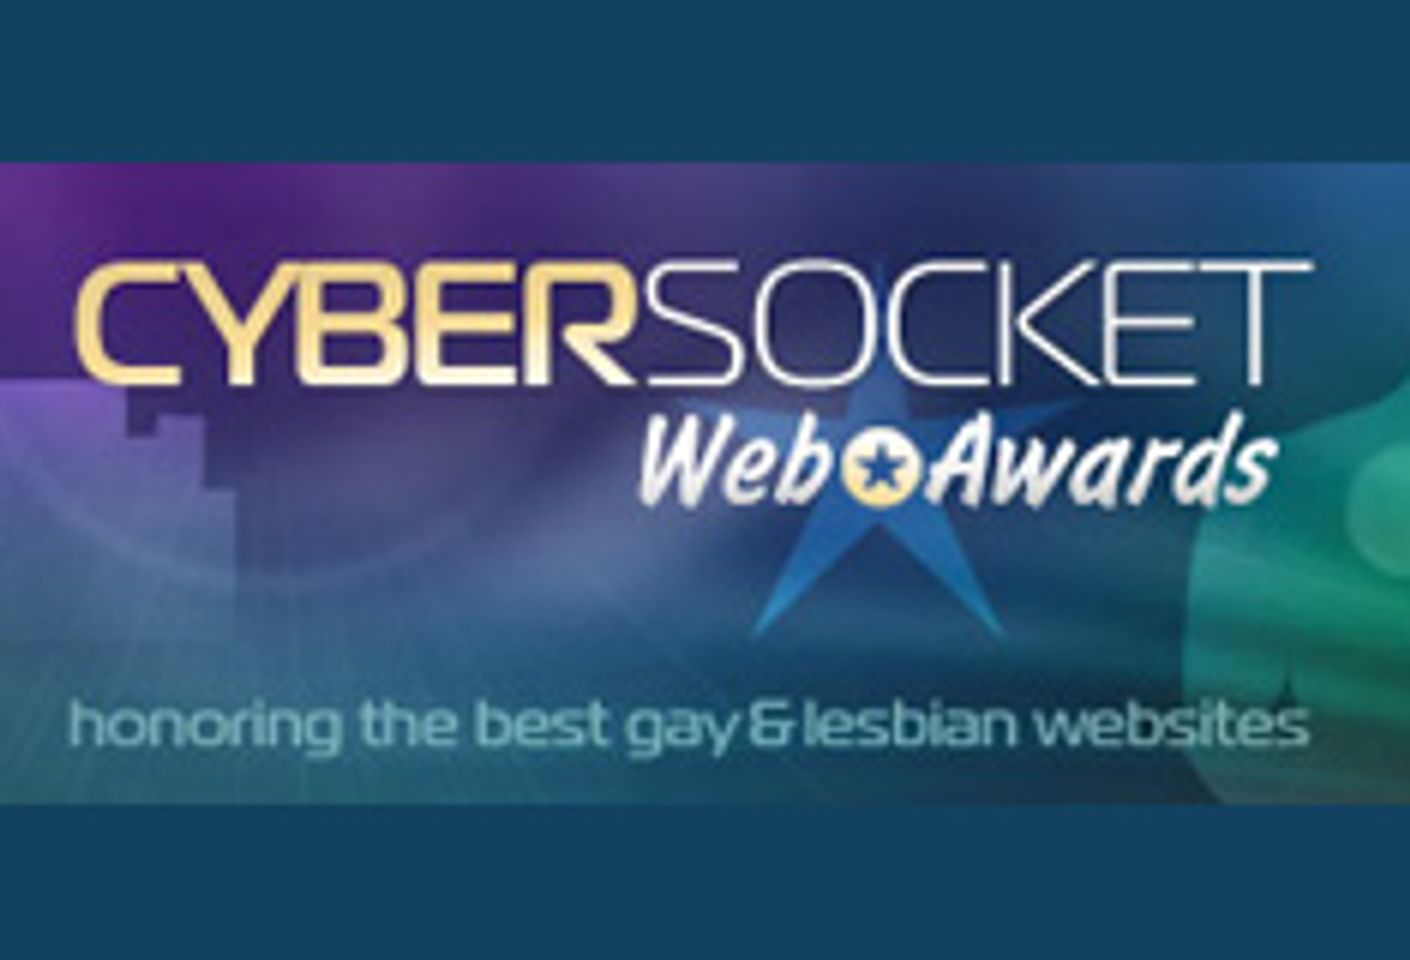 Voting Has Begun for 15th Annual Cybersocket Awards